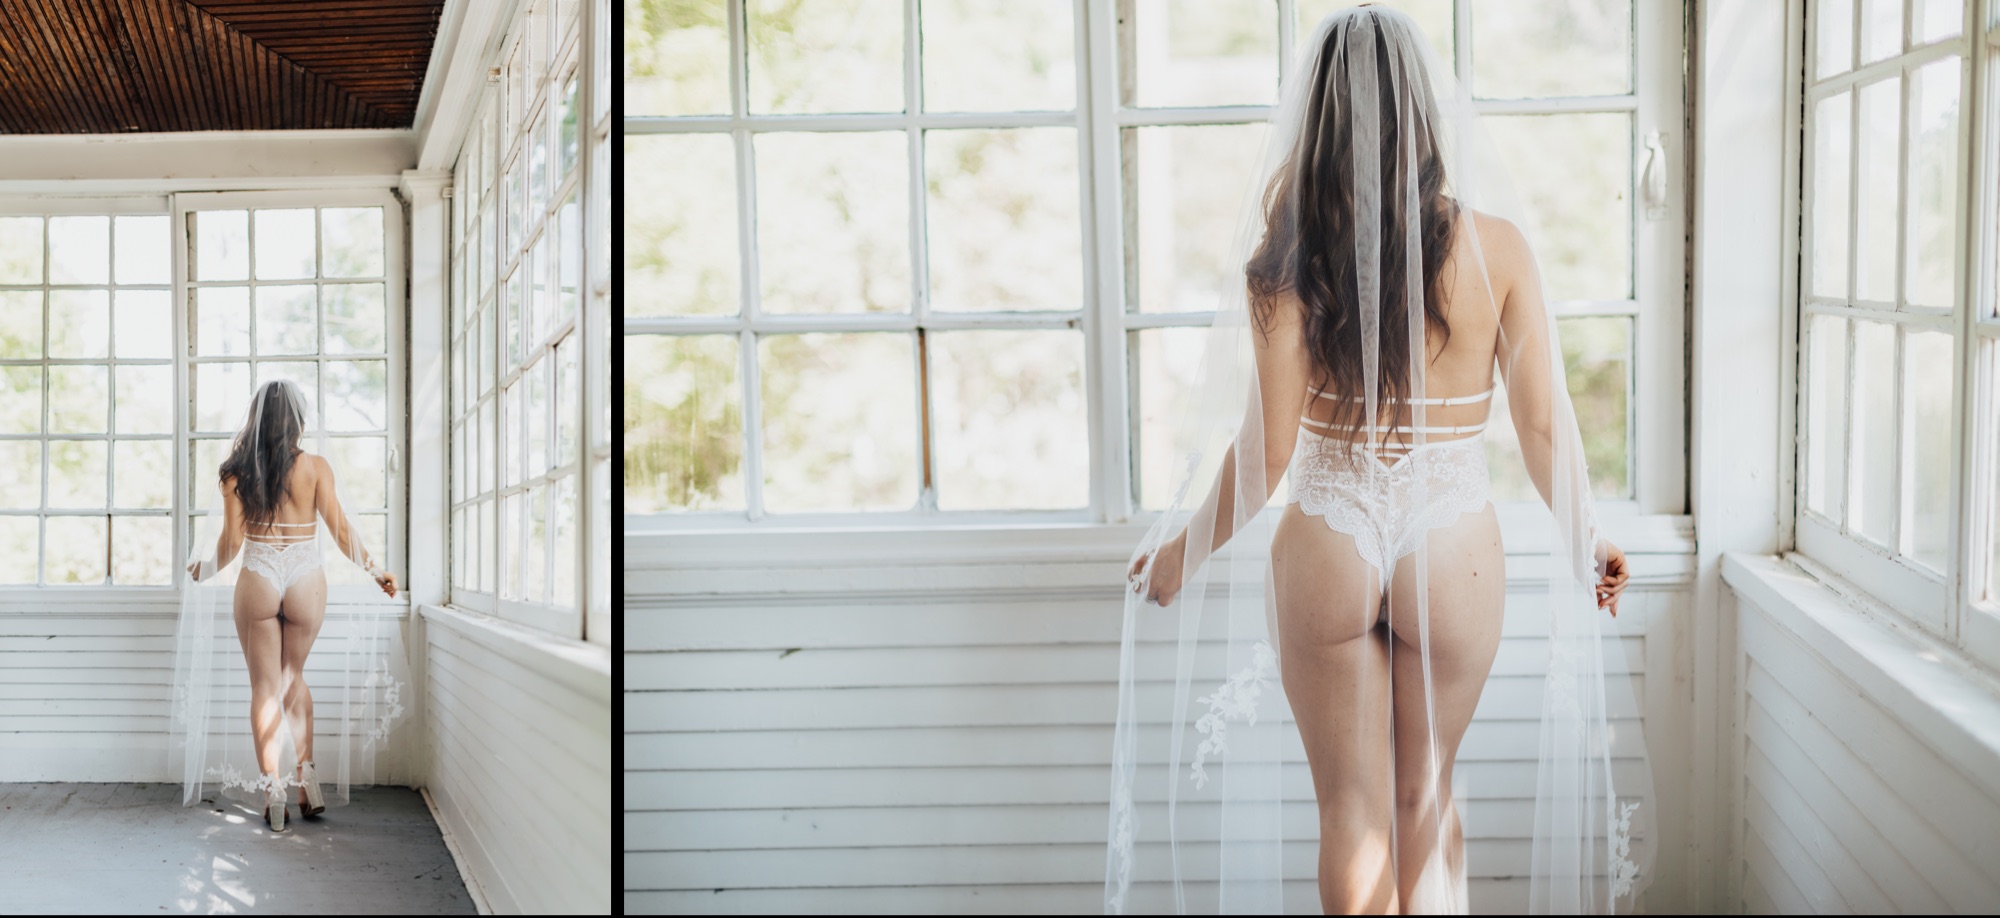 Morgans Intimate Bridal Boudoir Session at the Hive House Studio in Stillwater Minnesota